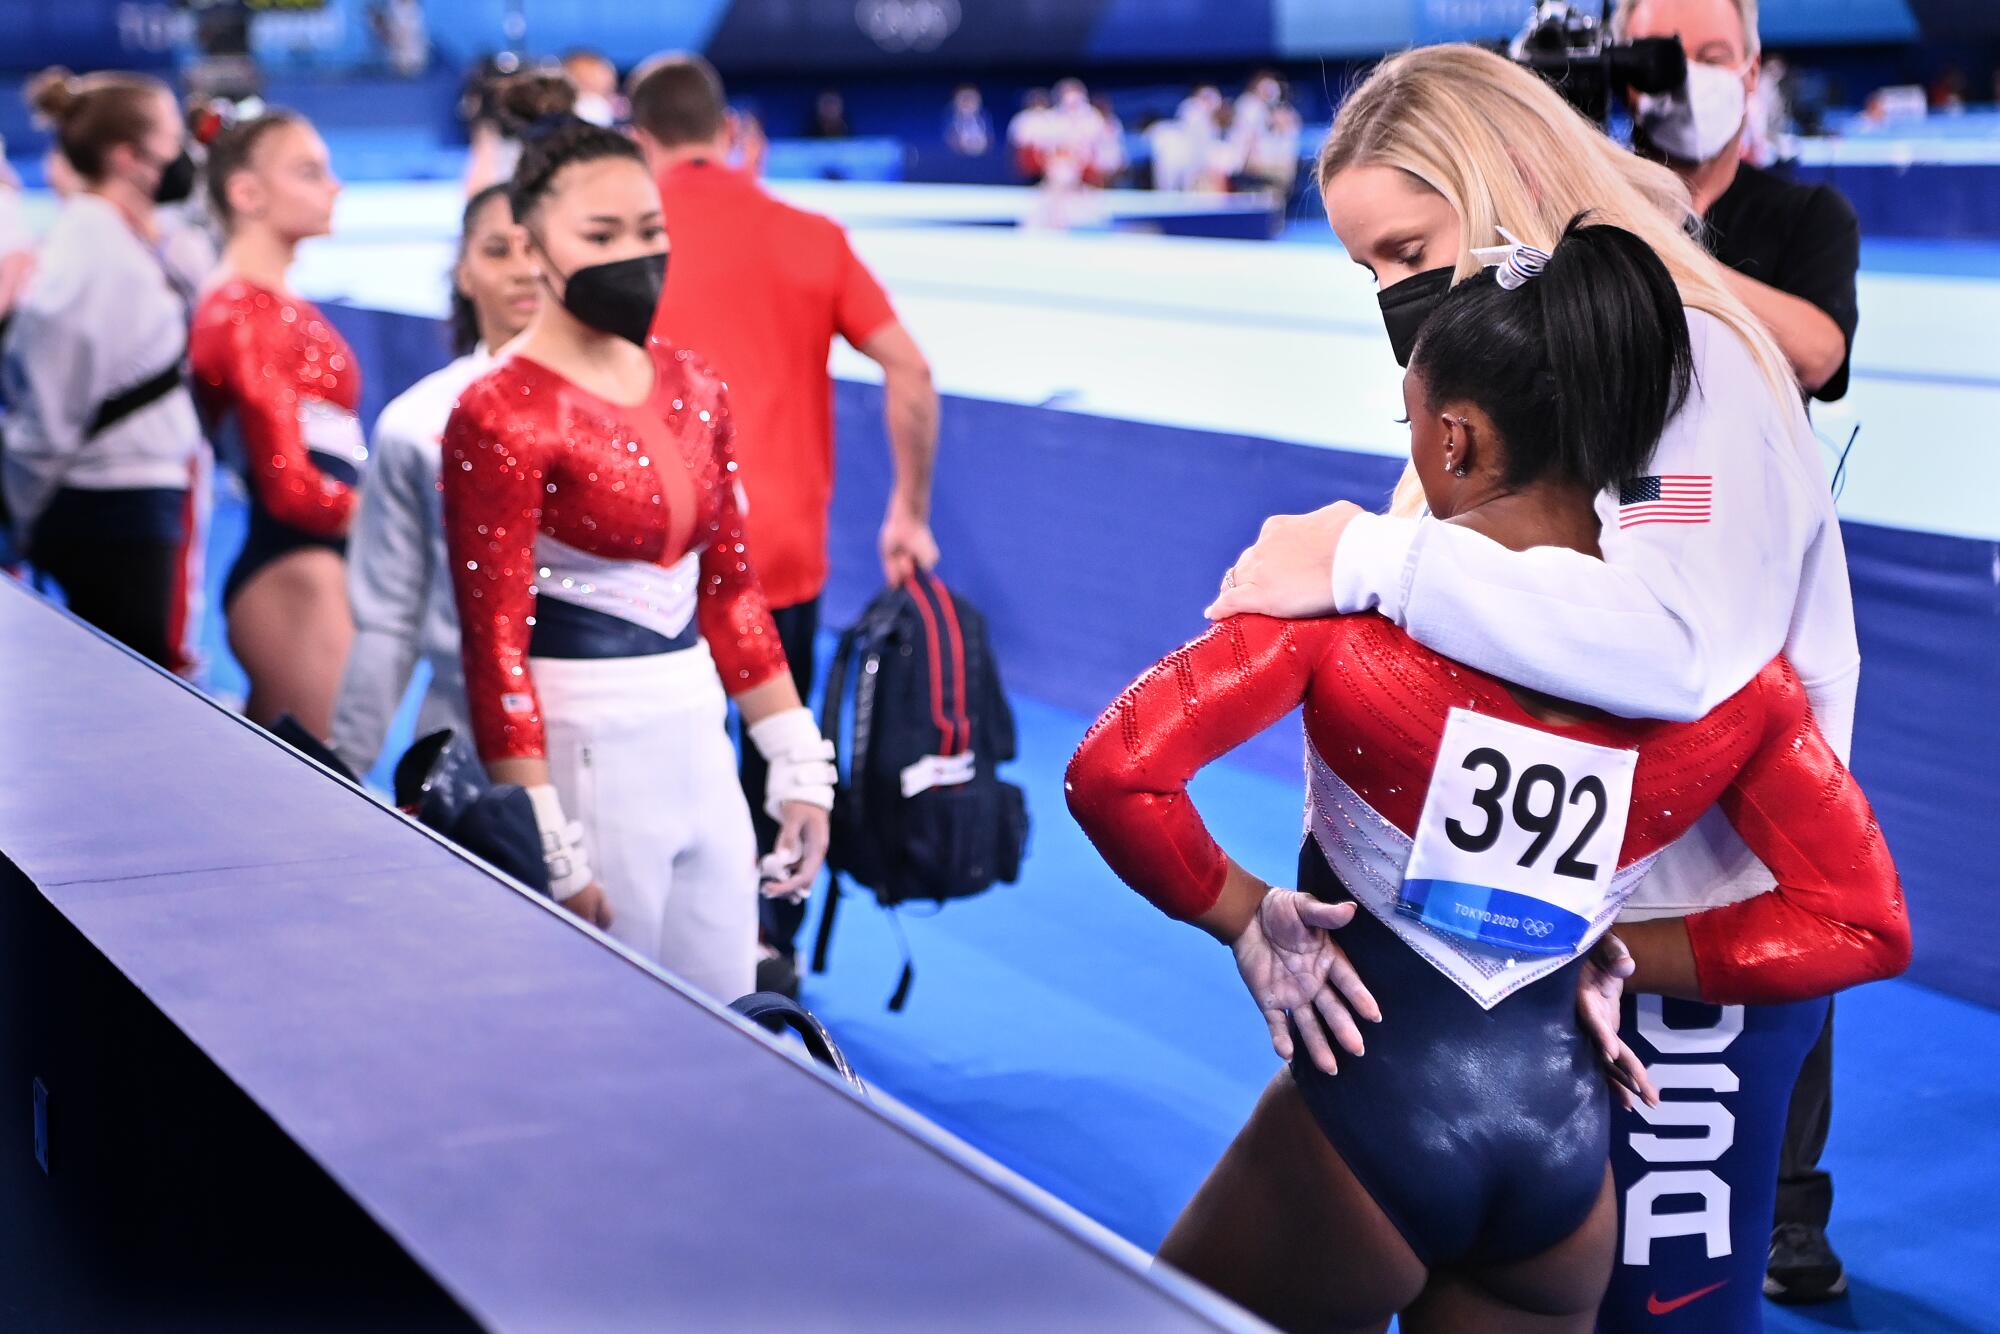 A woman in USA warmups puts her arm around Simone Biles, who stands with arms akimbo.